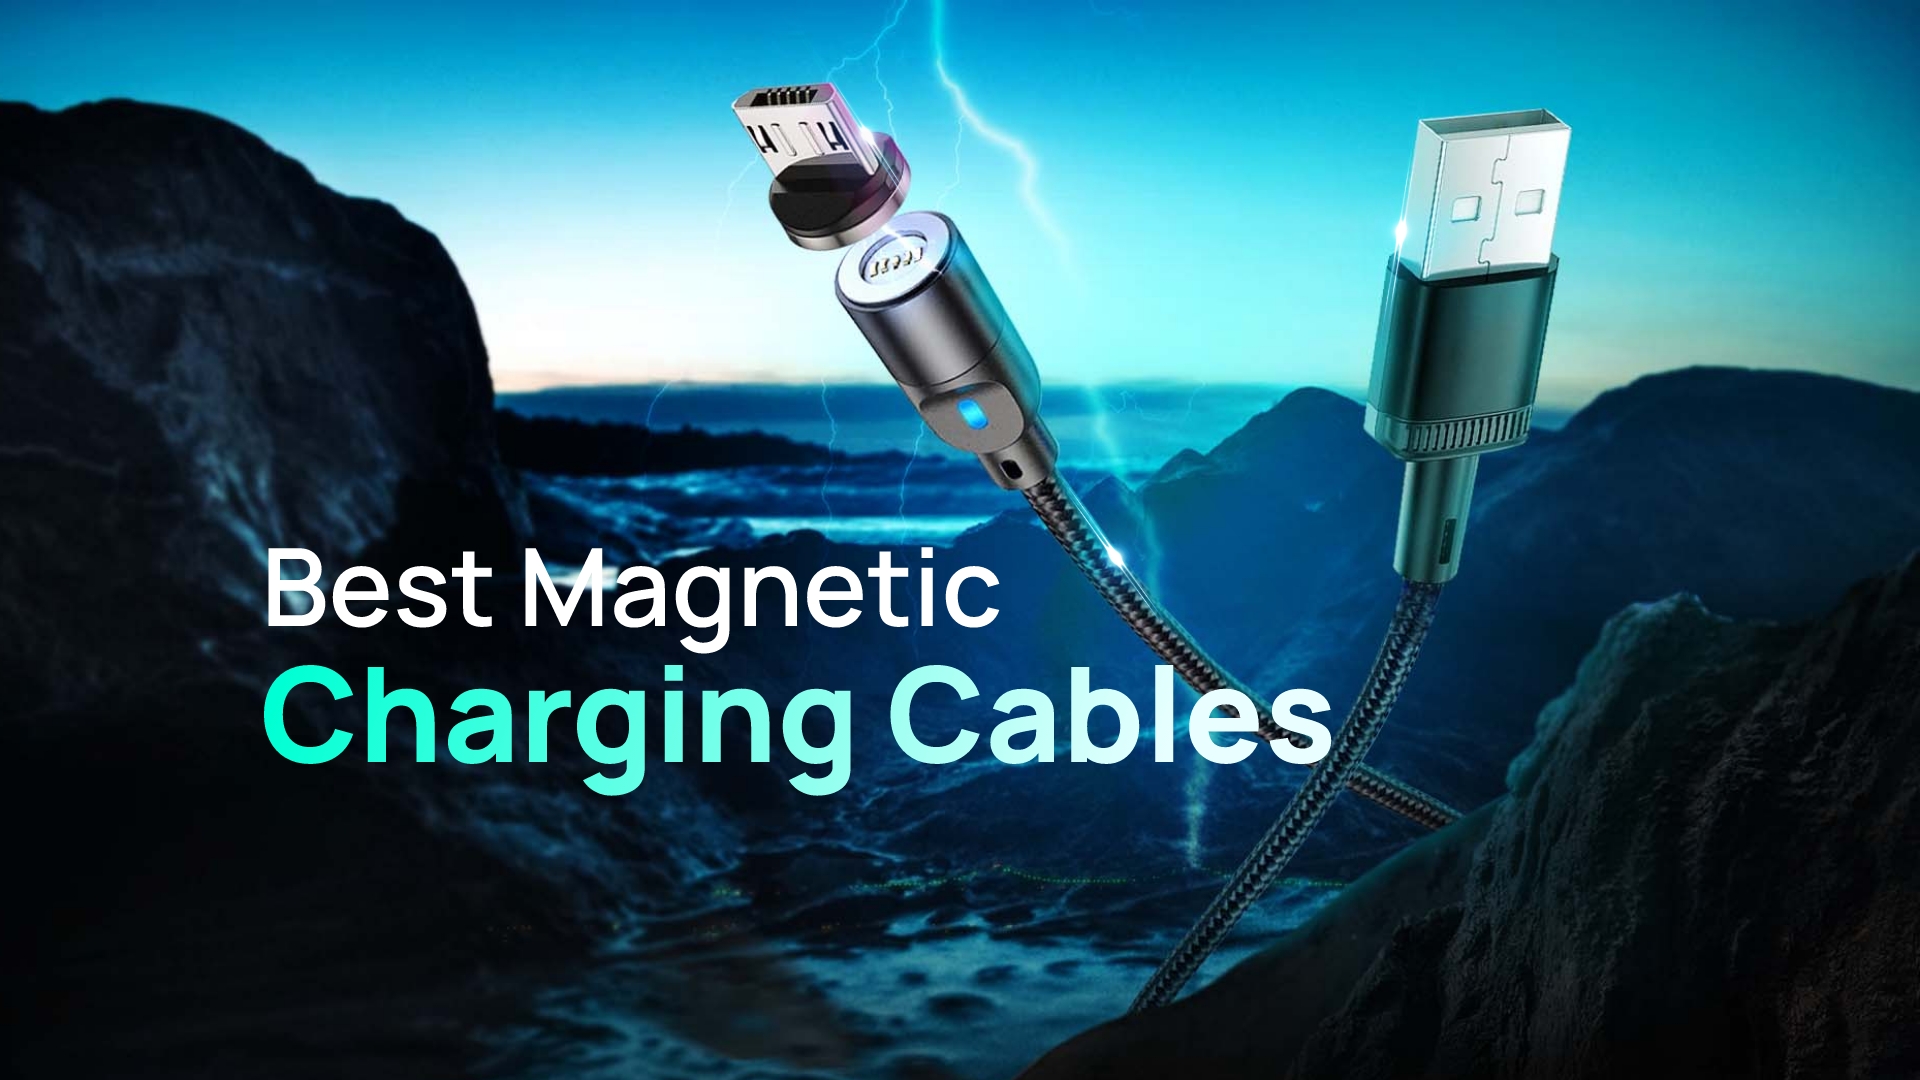 10 Best Magnetic Charging Cables in 2022